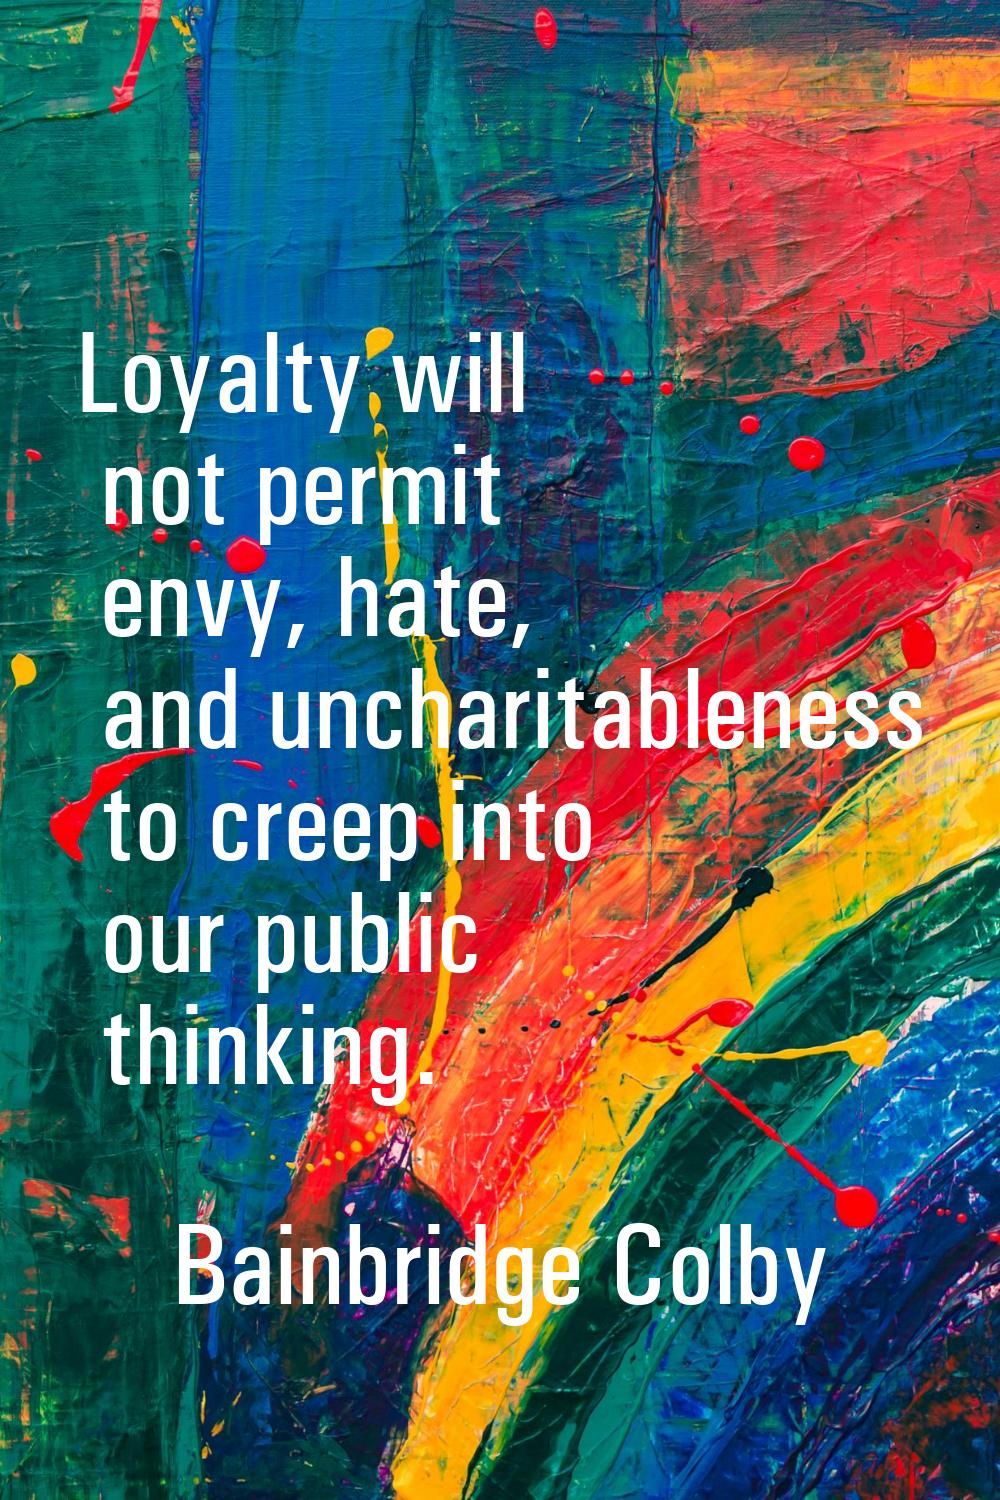 Loyalty will not permit envy, hate, and uncharitableness to creep into our public thinking.